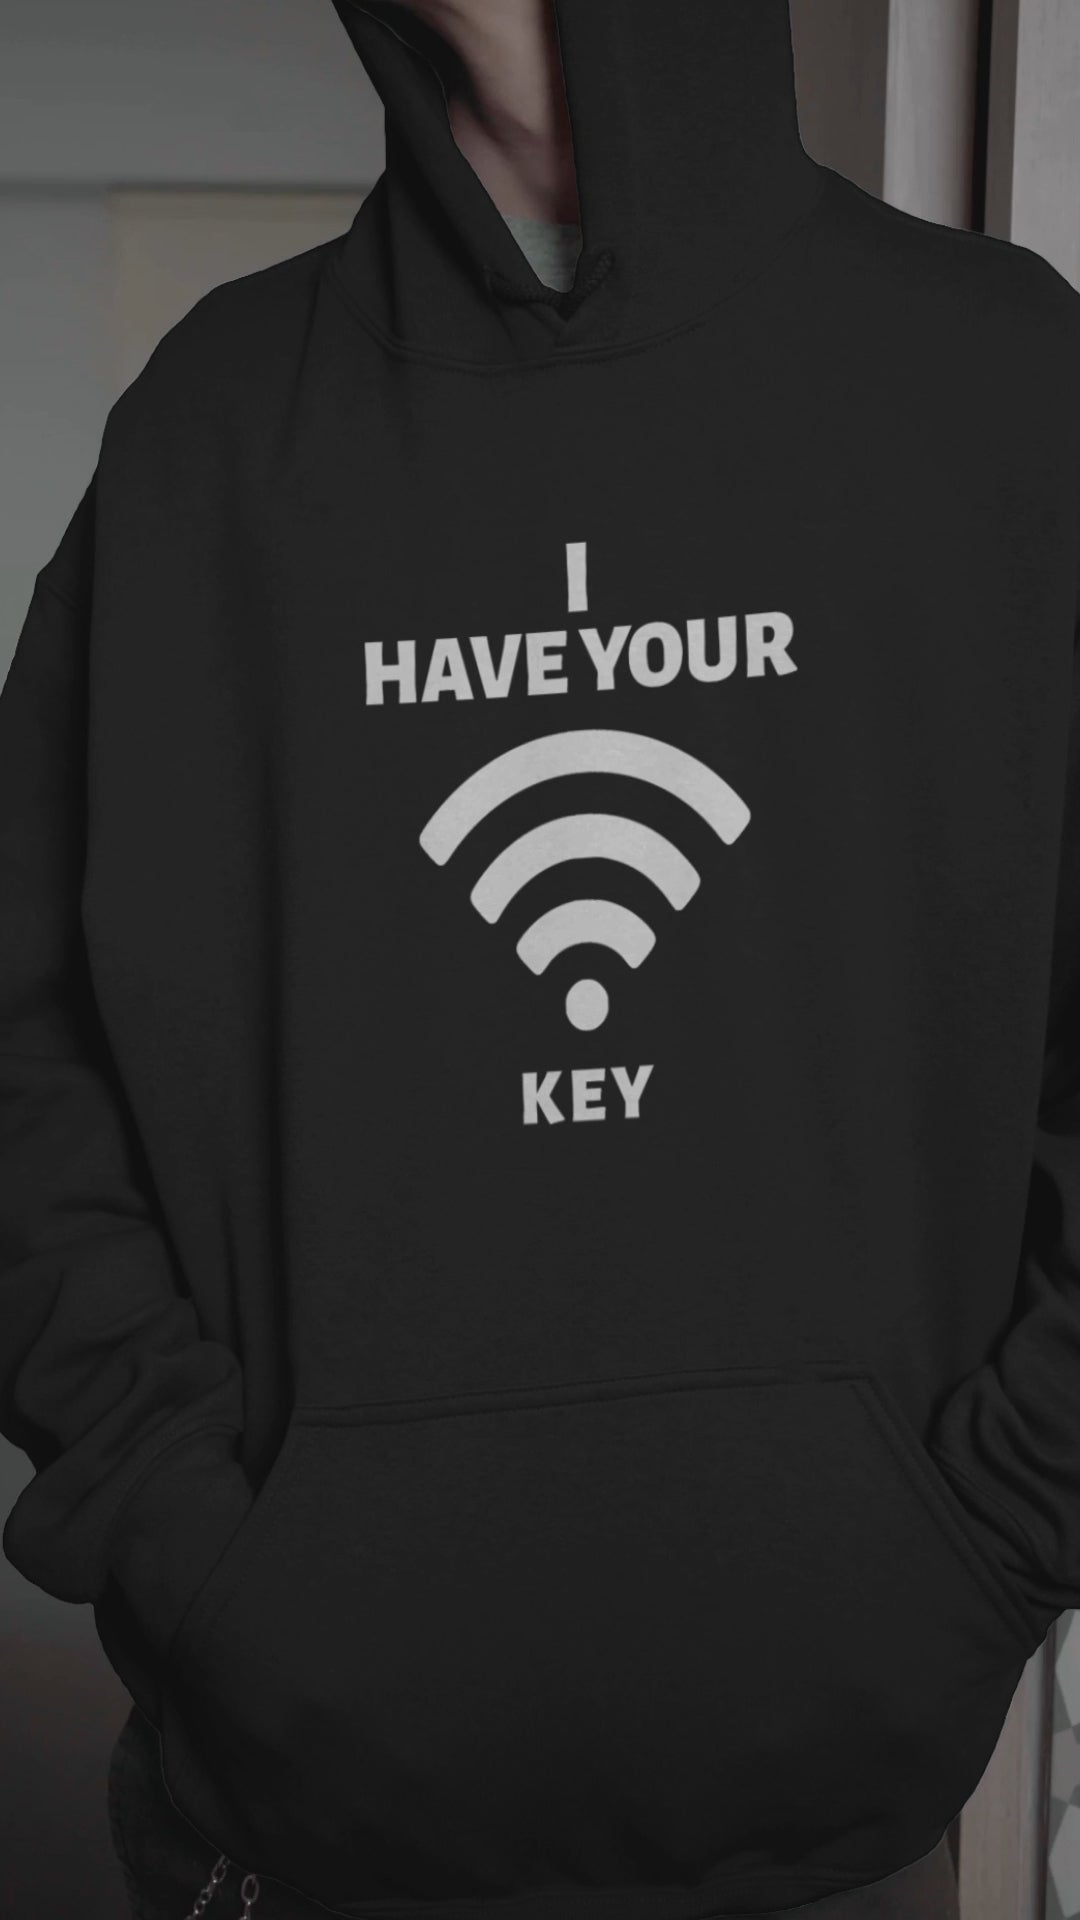 I have your Wi-Fi password - Unisex Hoodie